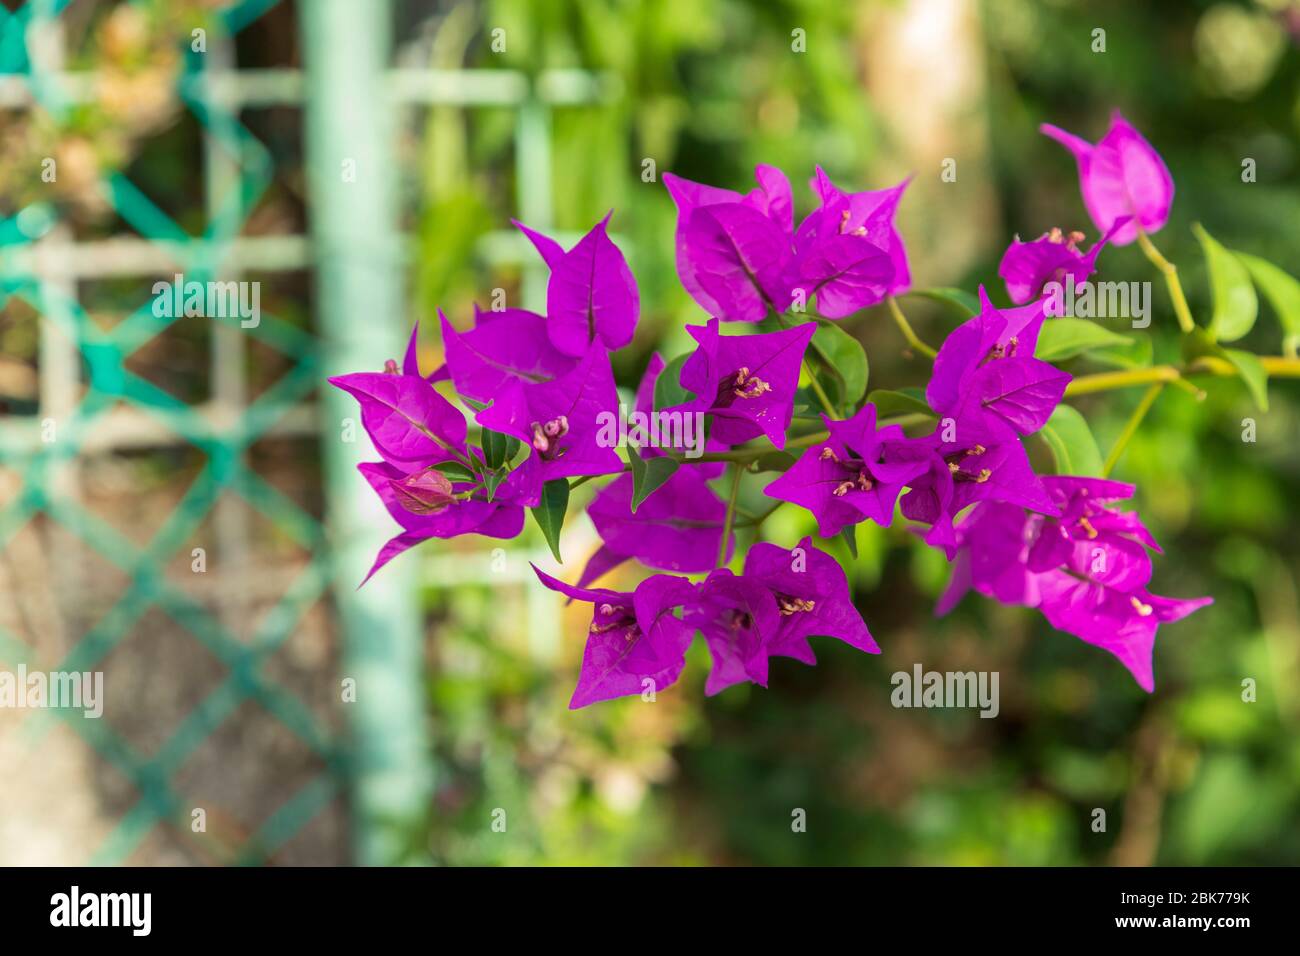 Beautiful pink bougainvillea hedge flower with an out of focus chain link fence background Stock Photo